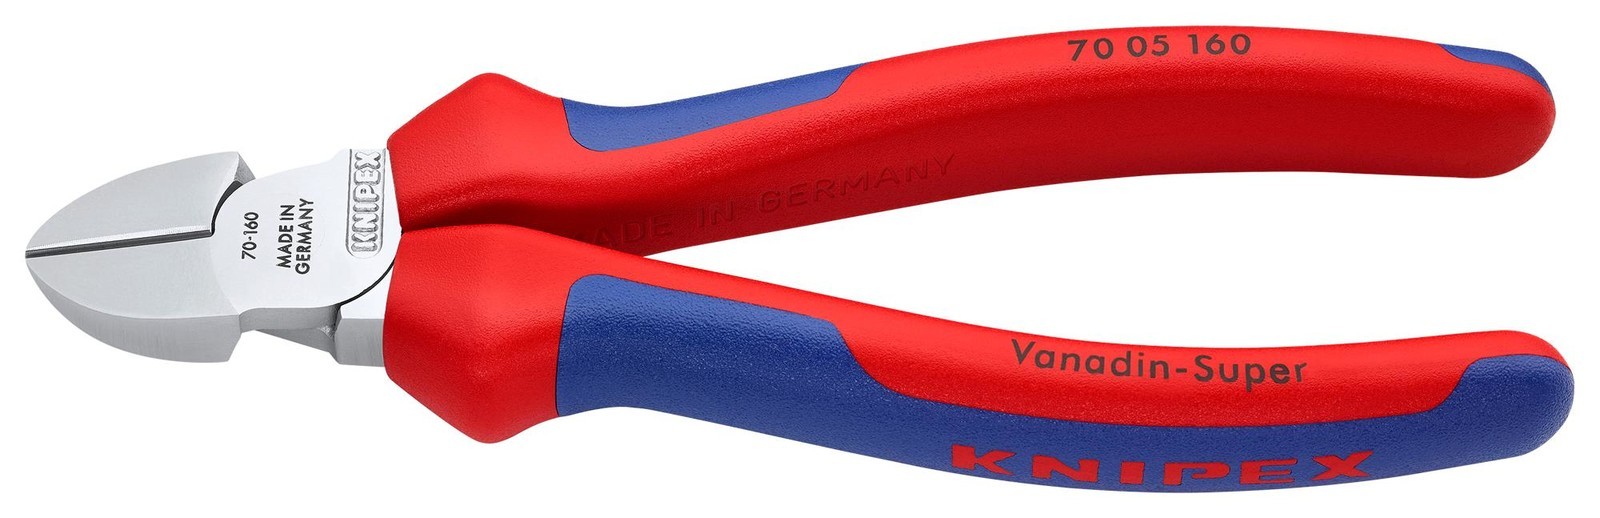 Knipex 70 05 160 Cutter, Side, 160mm